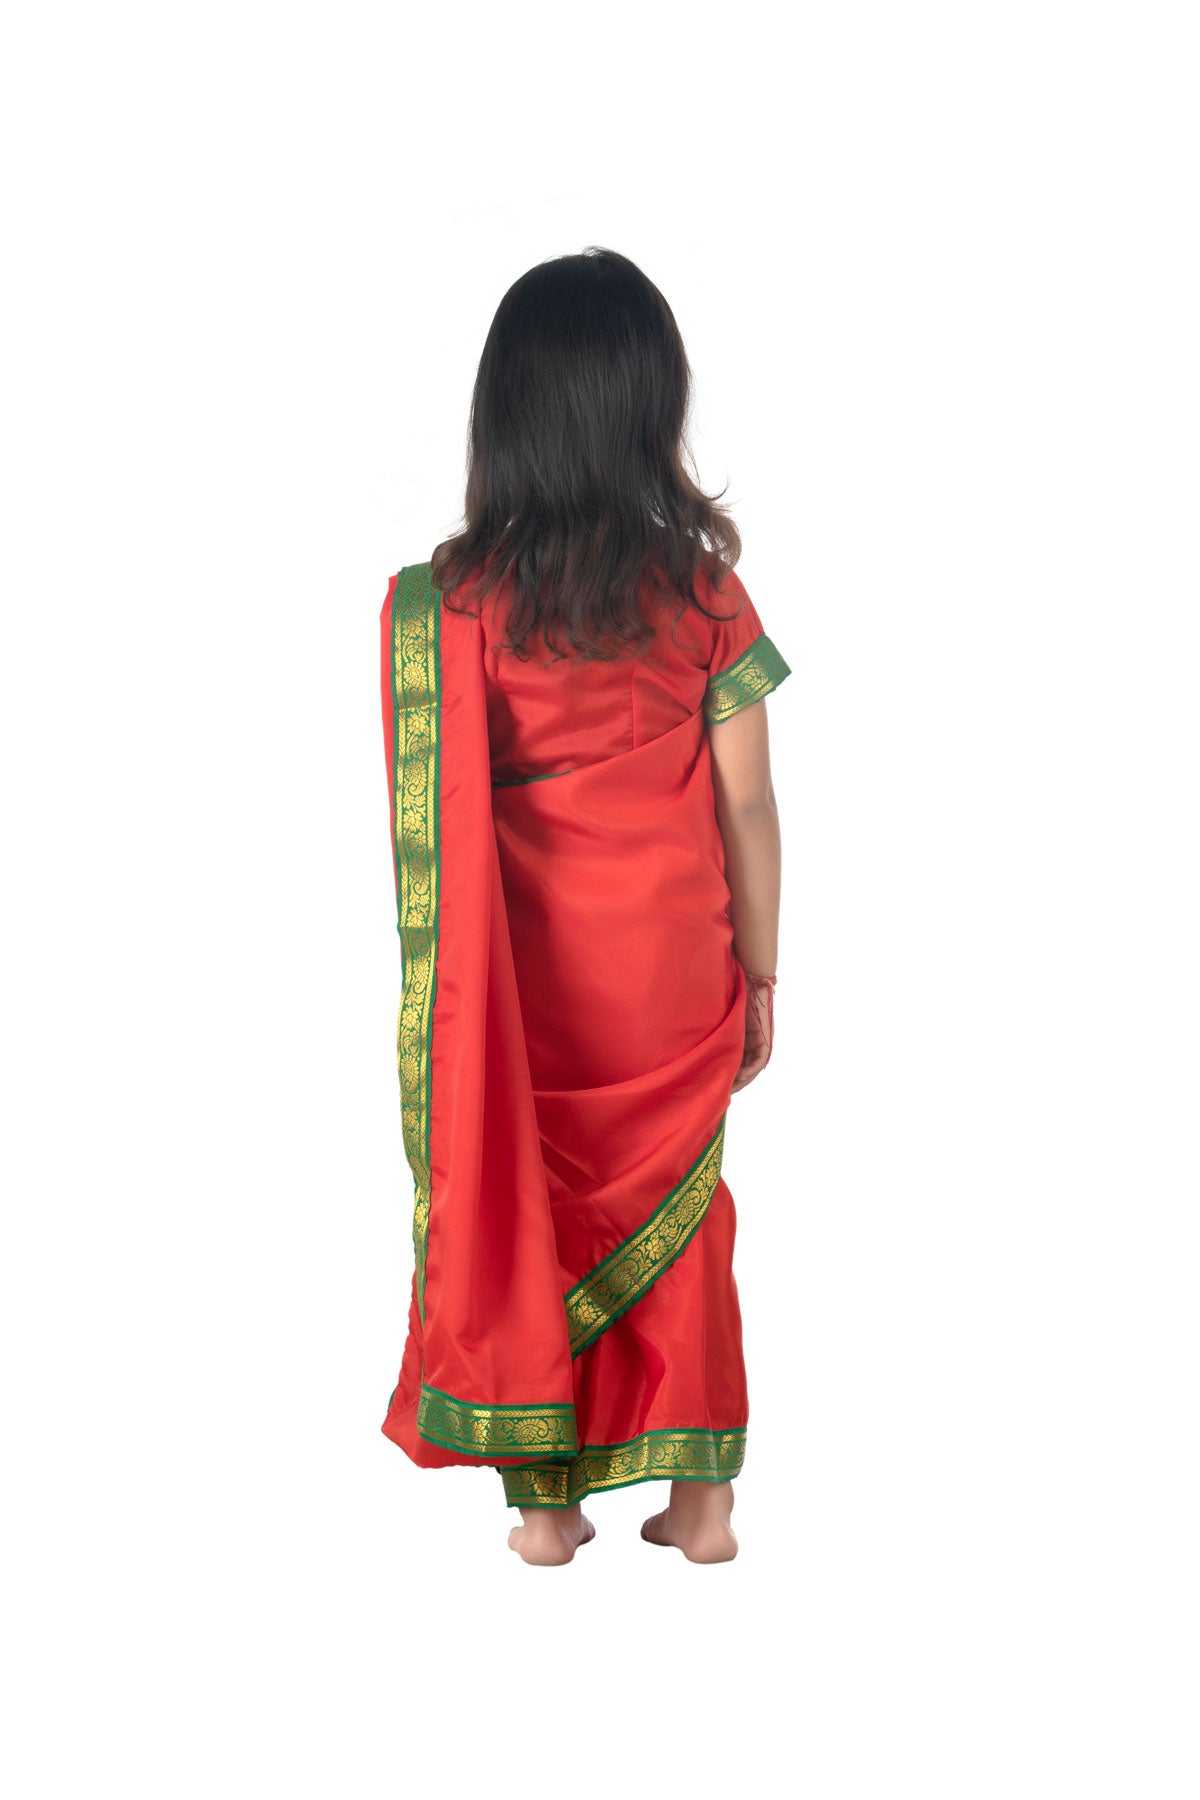 Top Ideas to Dress up Your Munchkins for Janmashtami – The Loom Blog